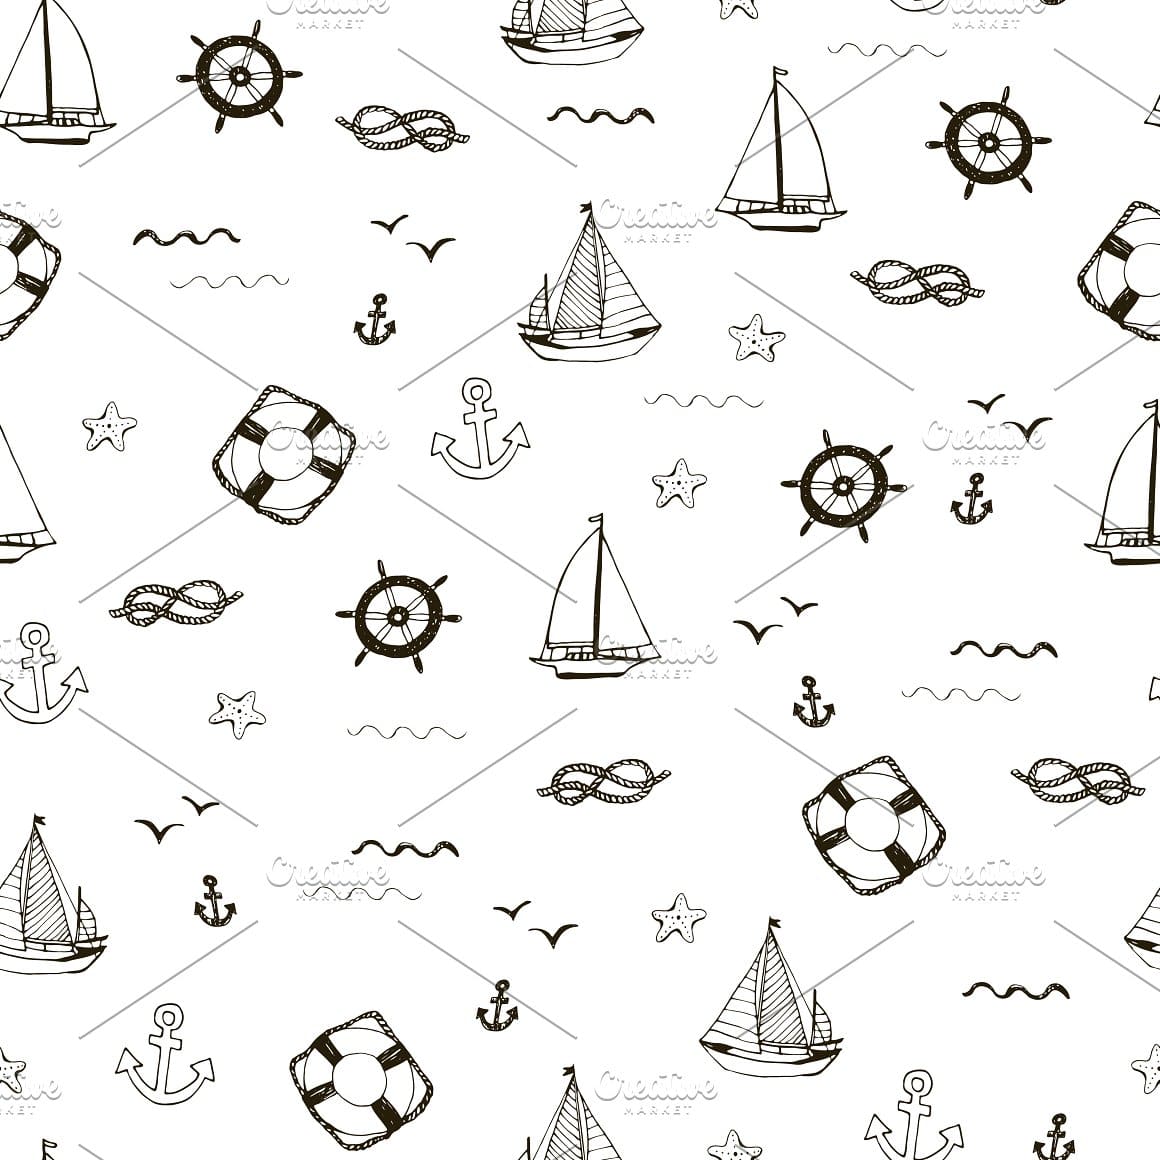 Starfish, yachts, waves on a white background.